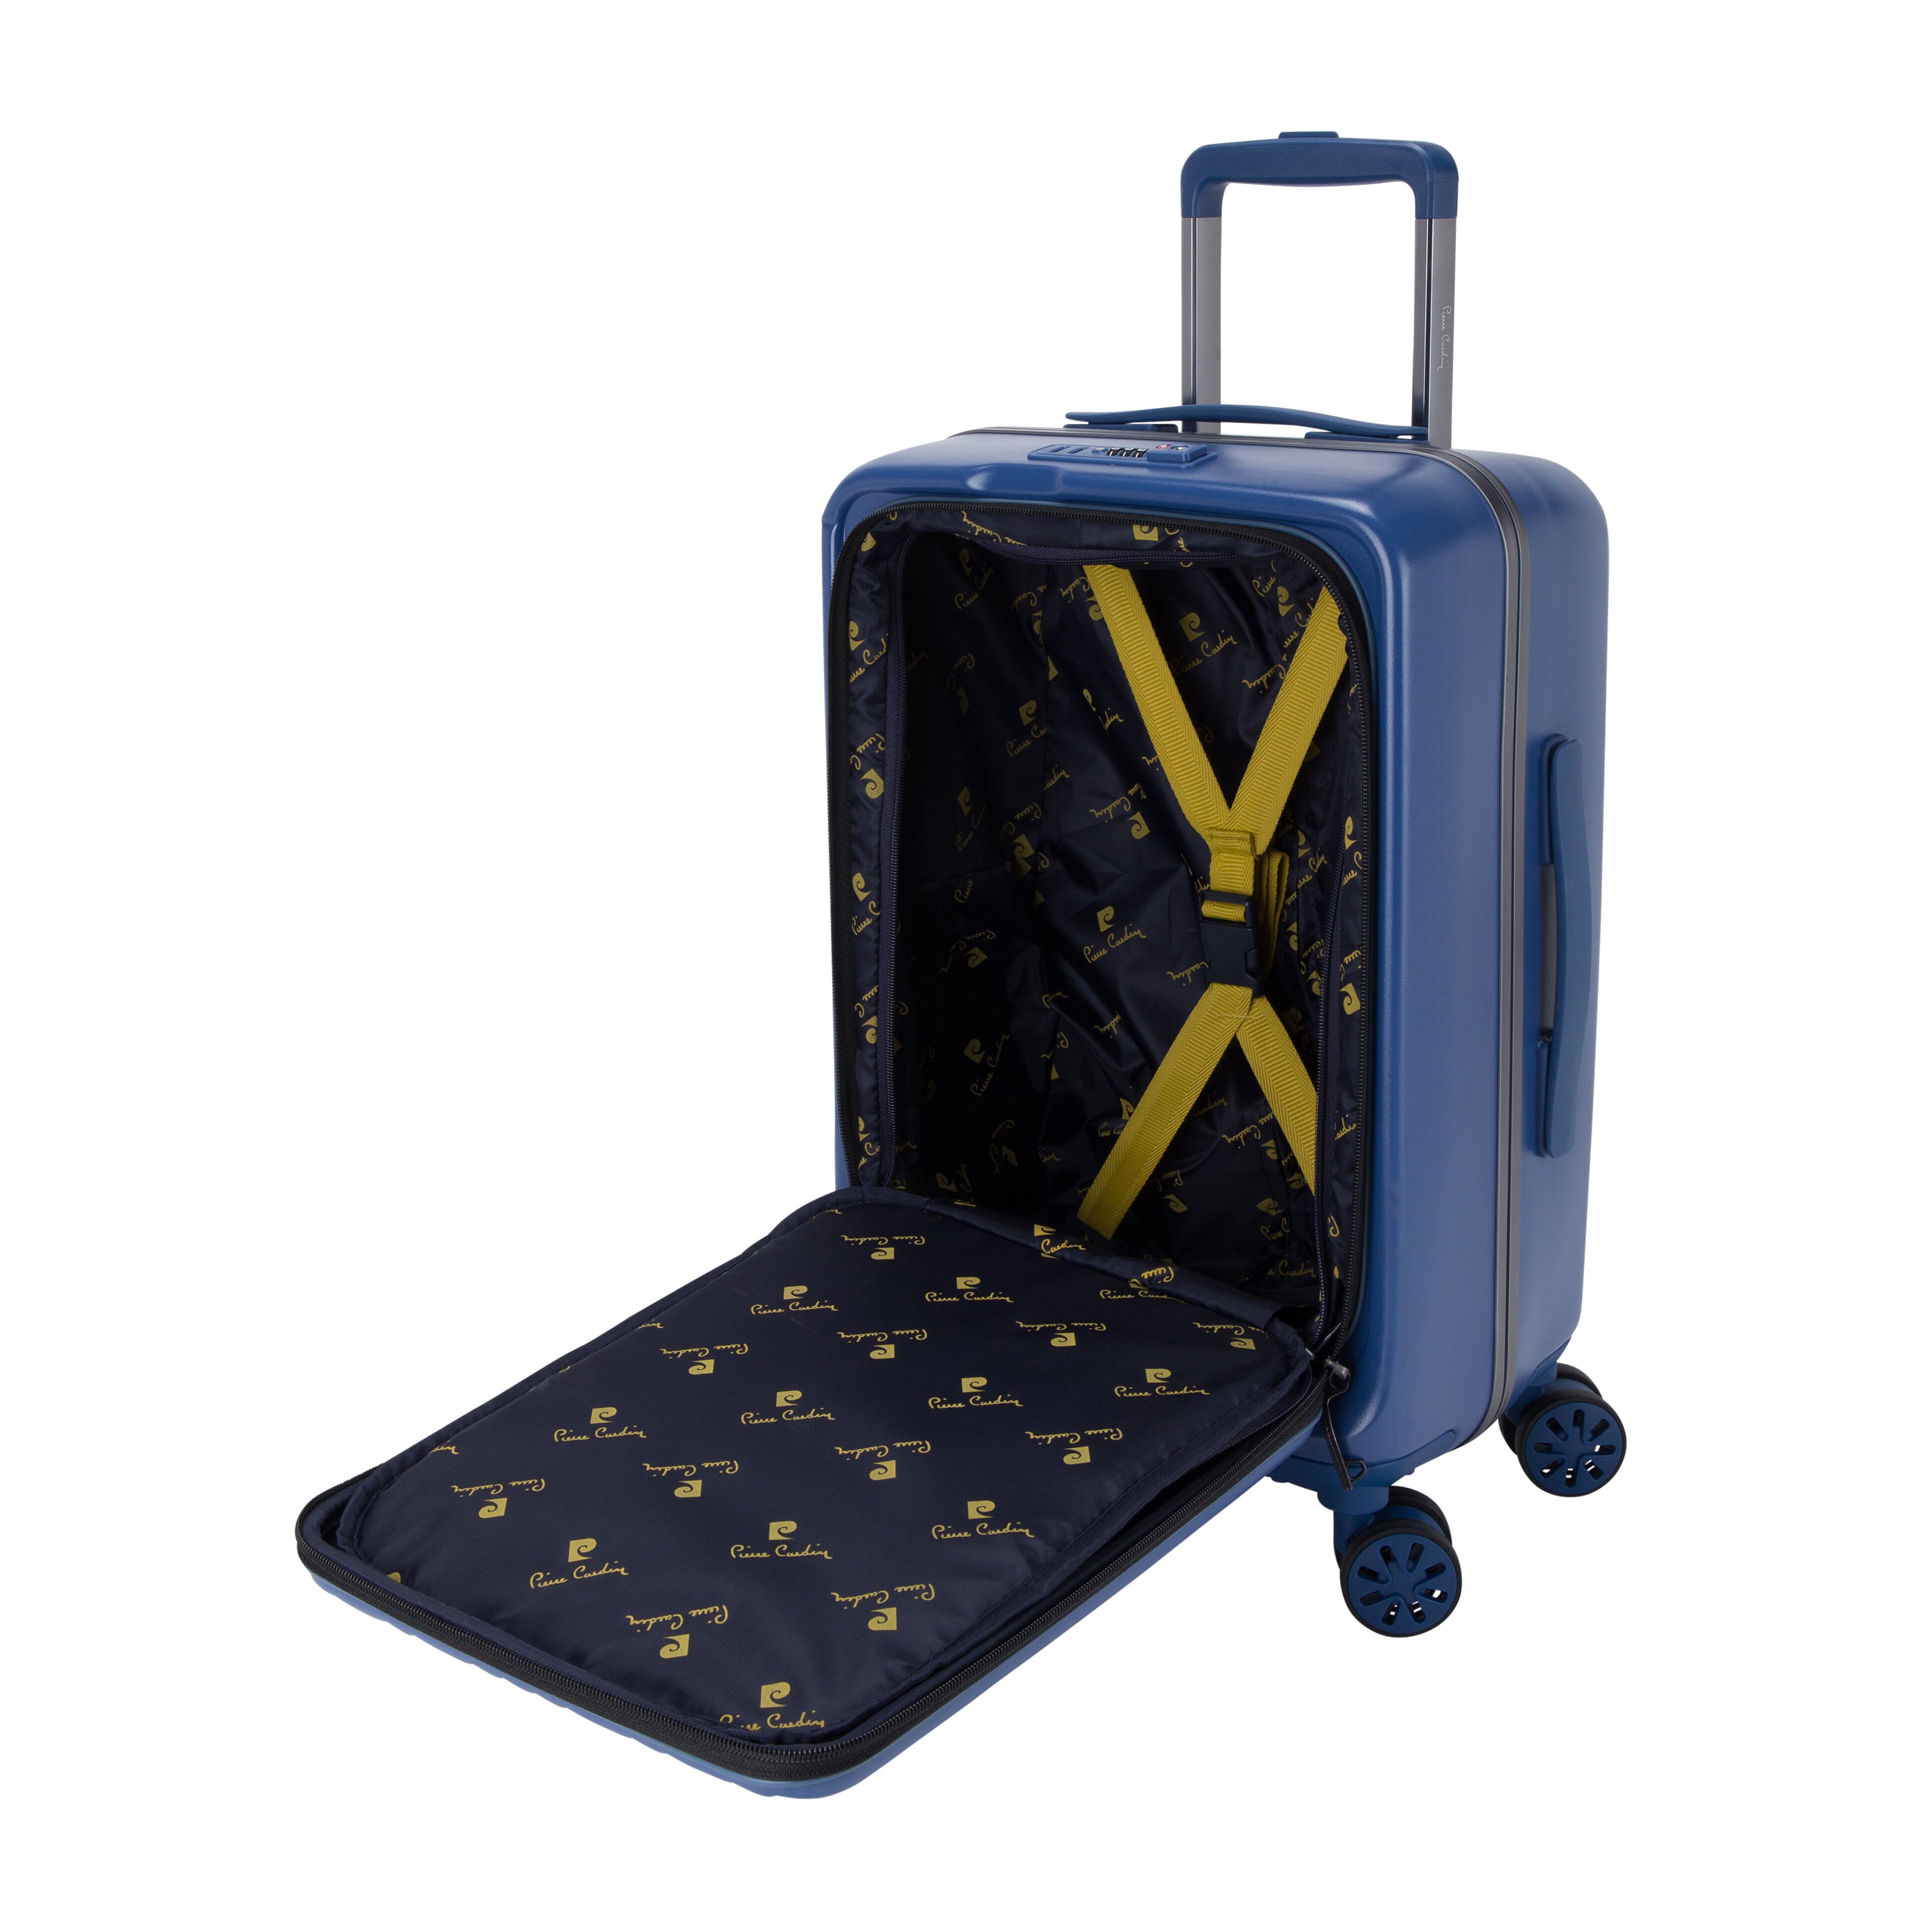 Pierre Cardin Suitcase Front Pocket Design Carry On, Navy